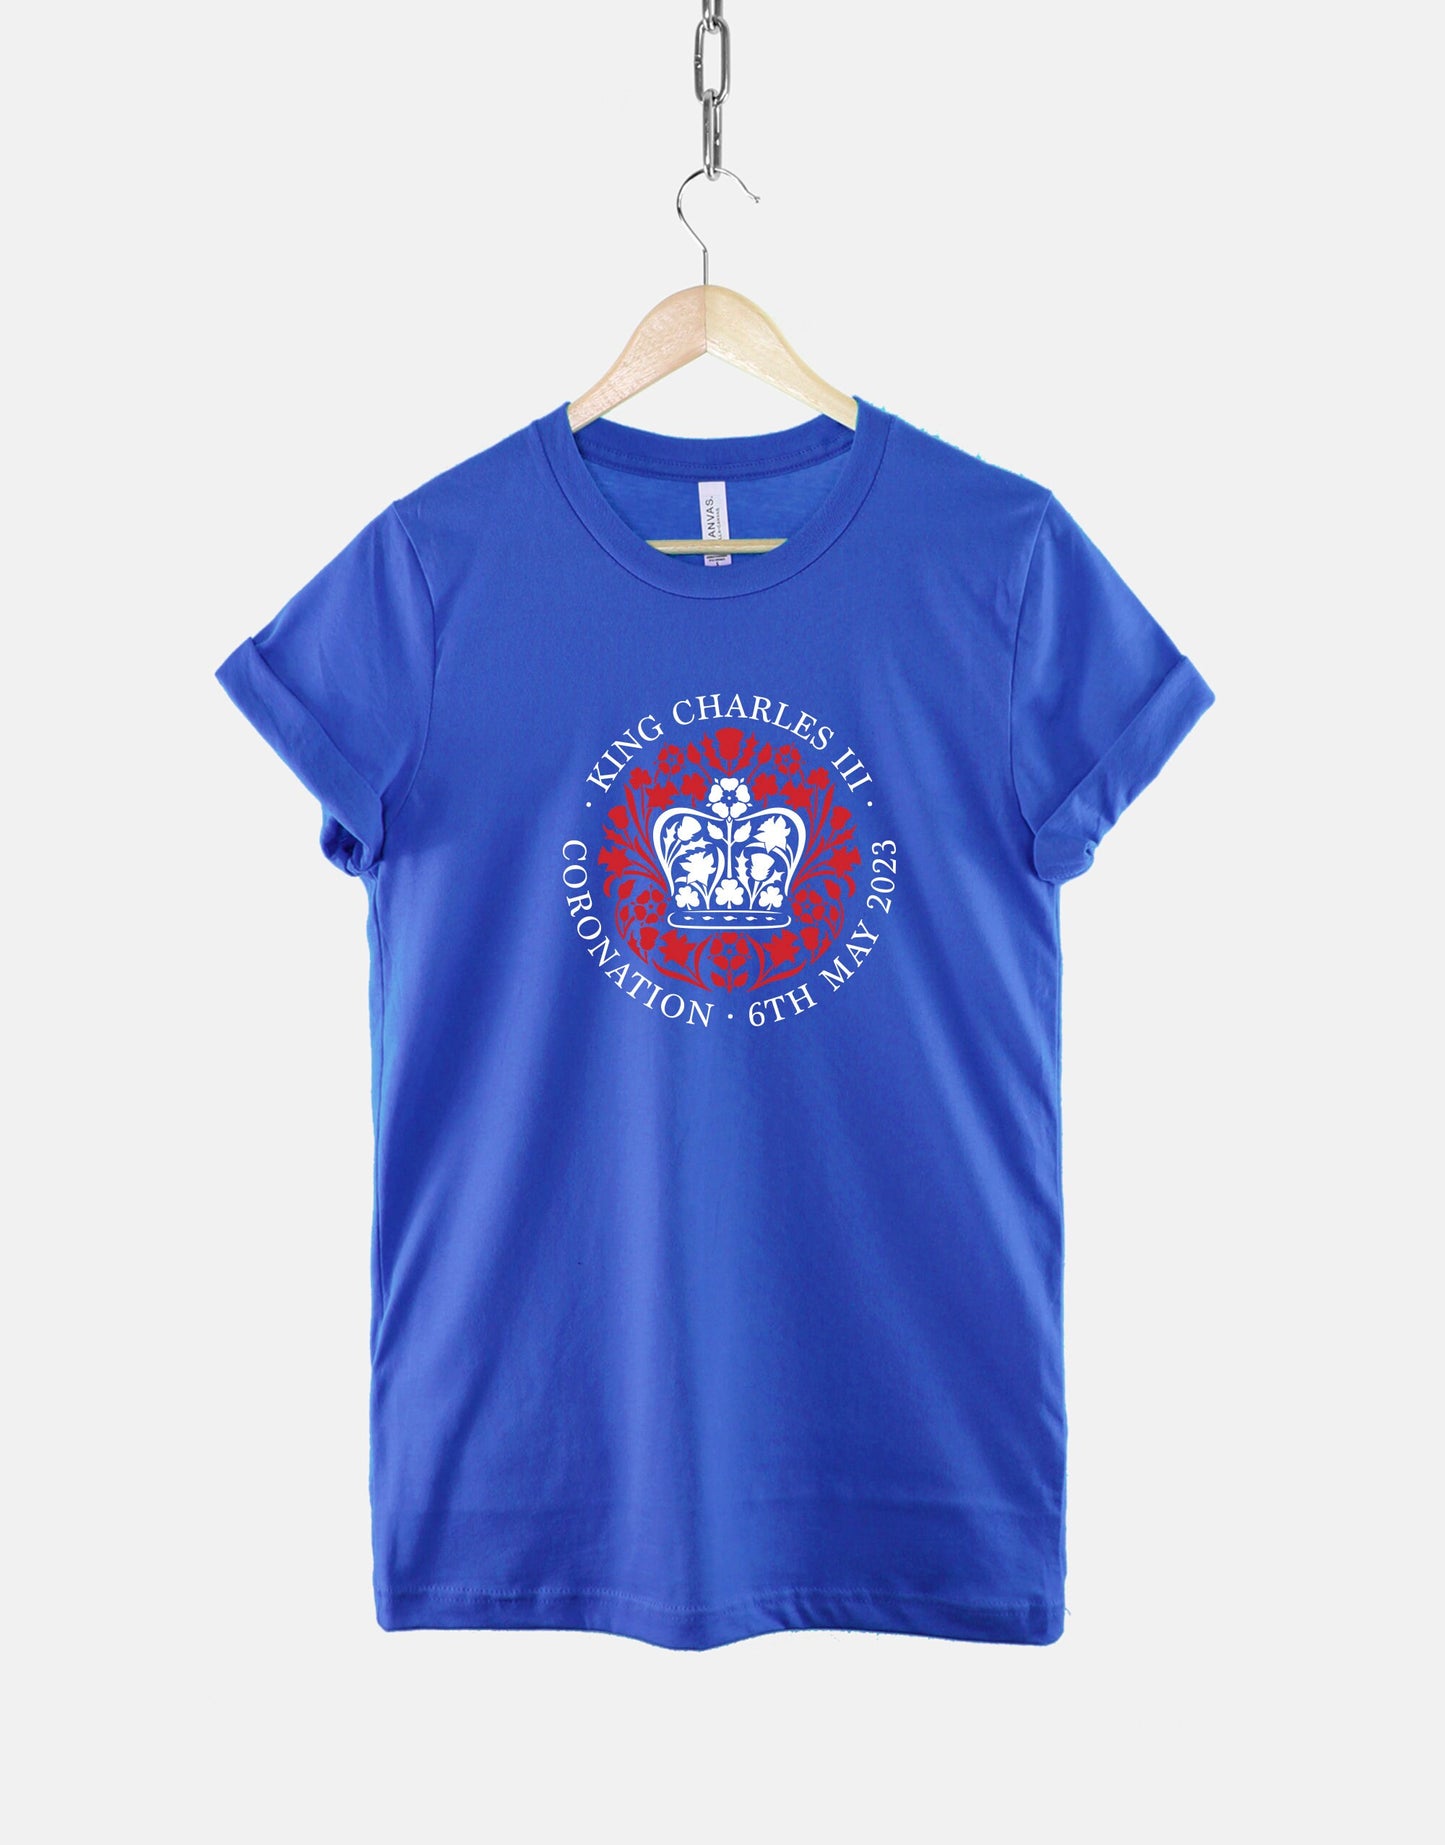 King Charles Coronation T-Shirts - King Charles III Coronation Day Souvenir T-Shirt - Coronation Party - Adults And Childrens Sizes